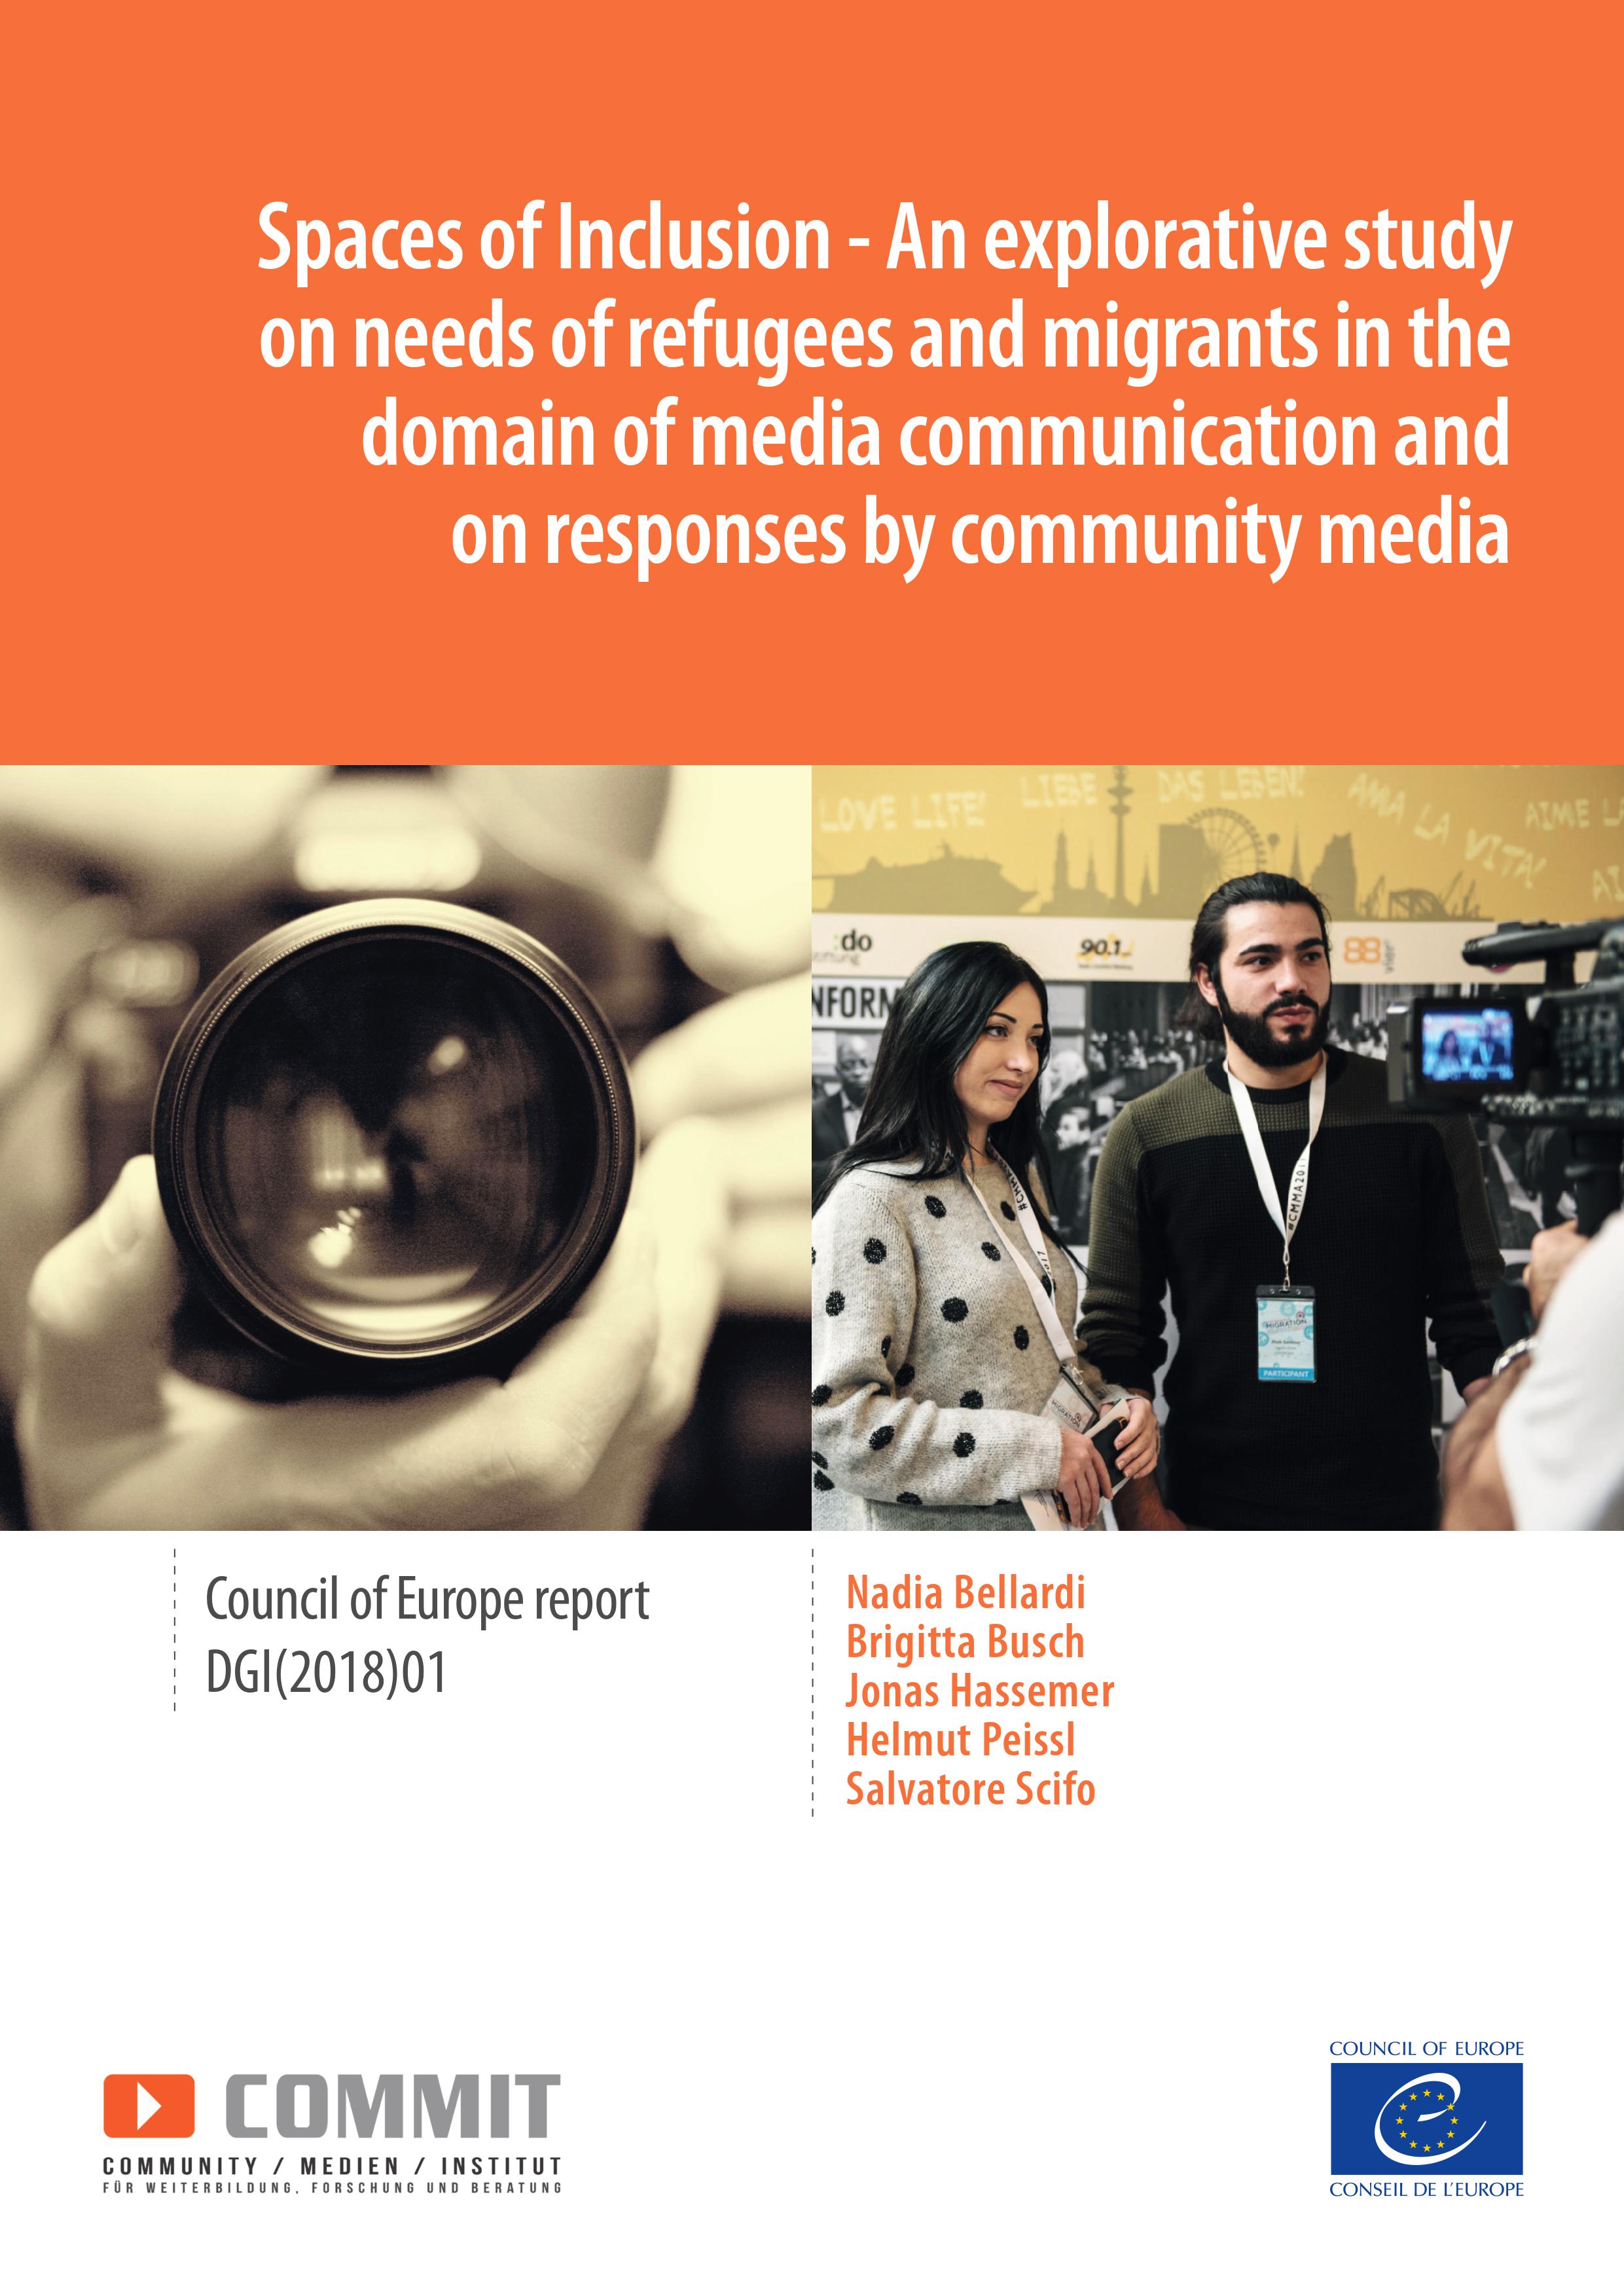 Spaces of Inclusion - An explorative study on needs of refugees and migrants in the domain of media communication and on responses by community media (en anglais)